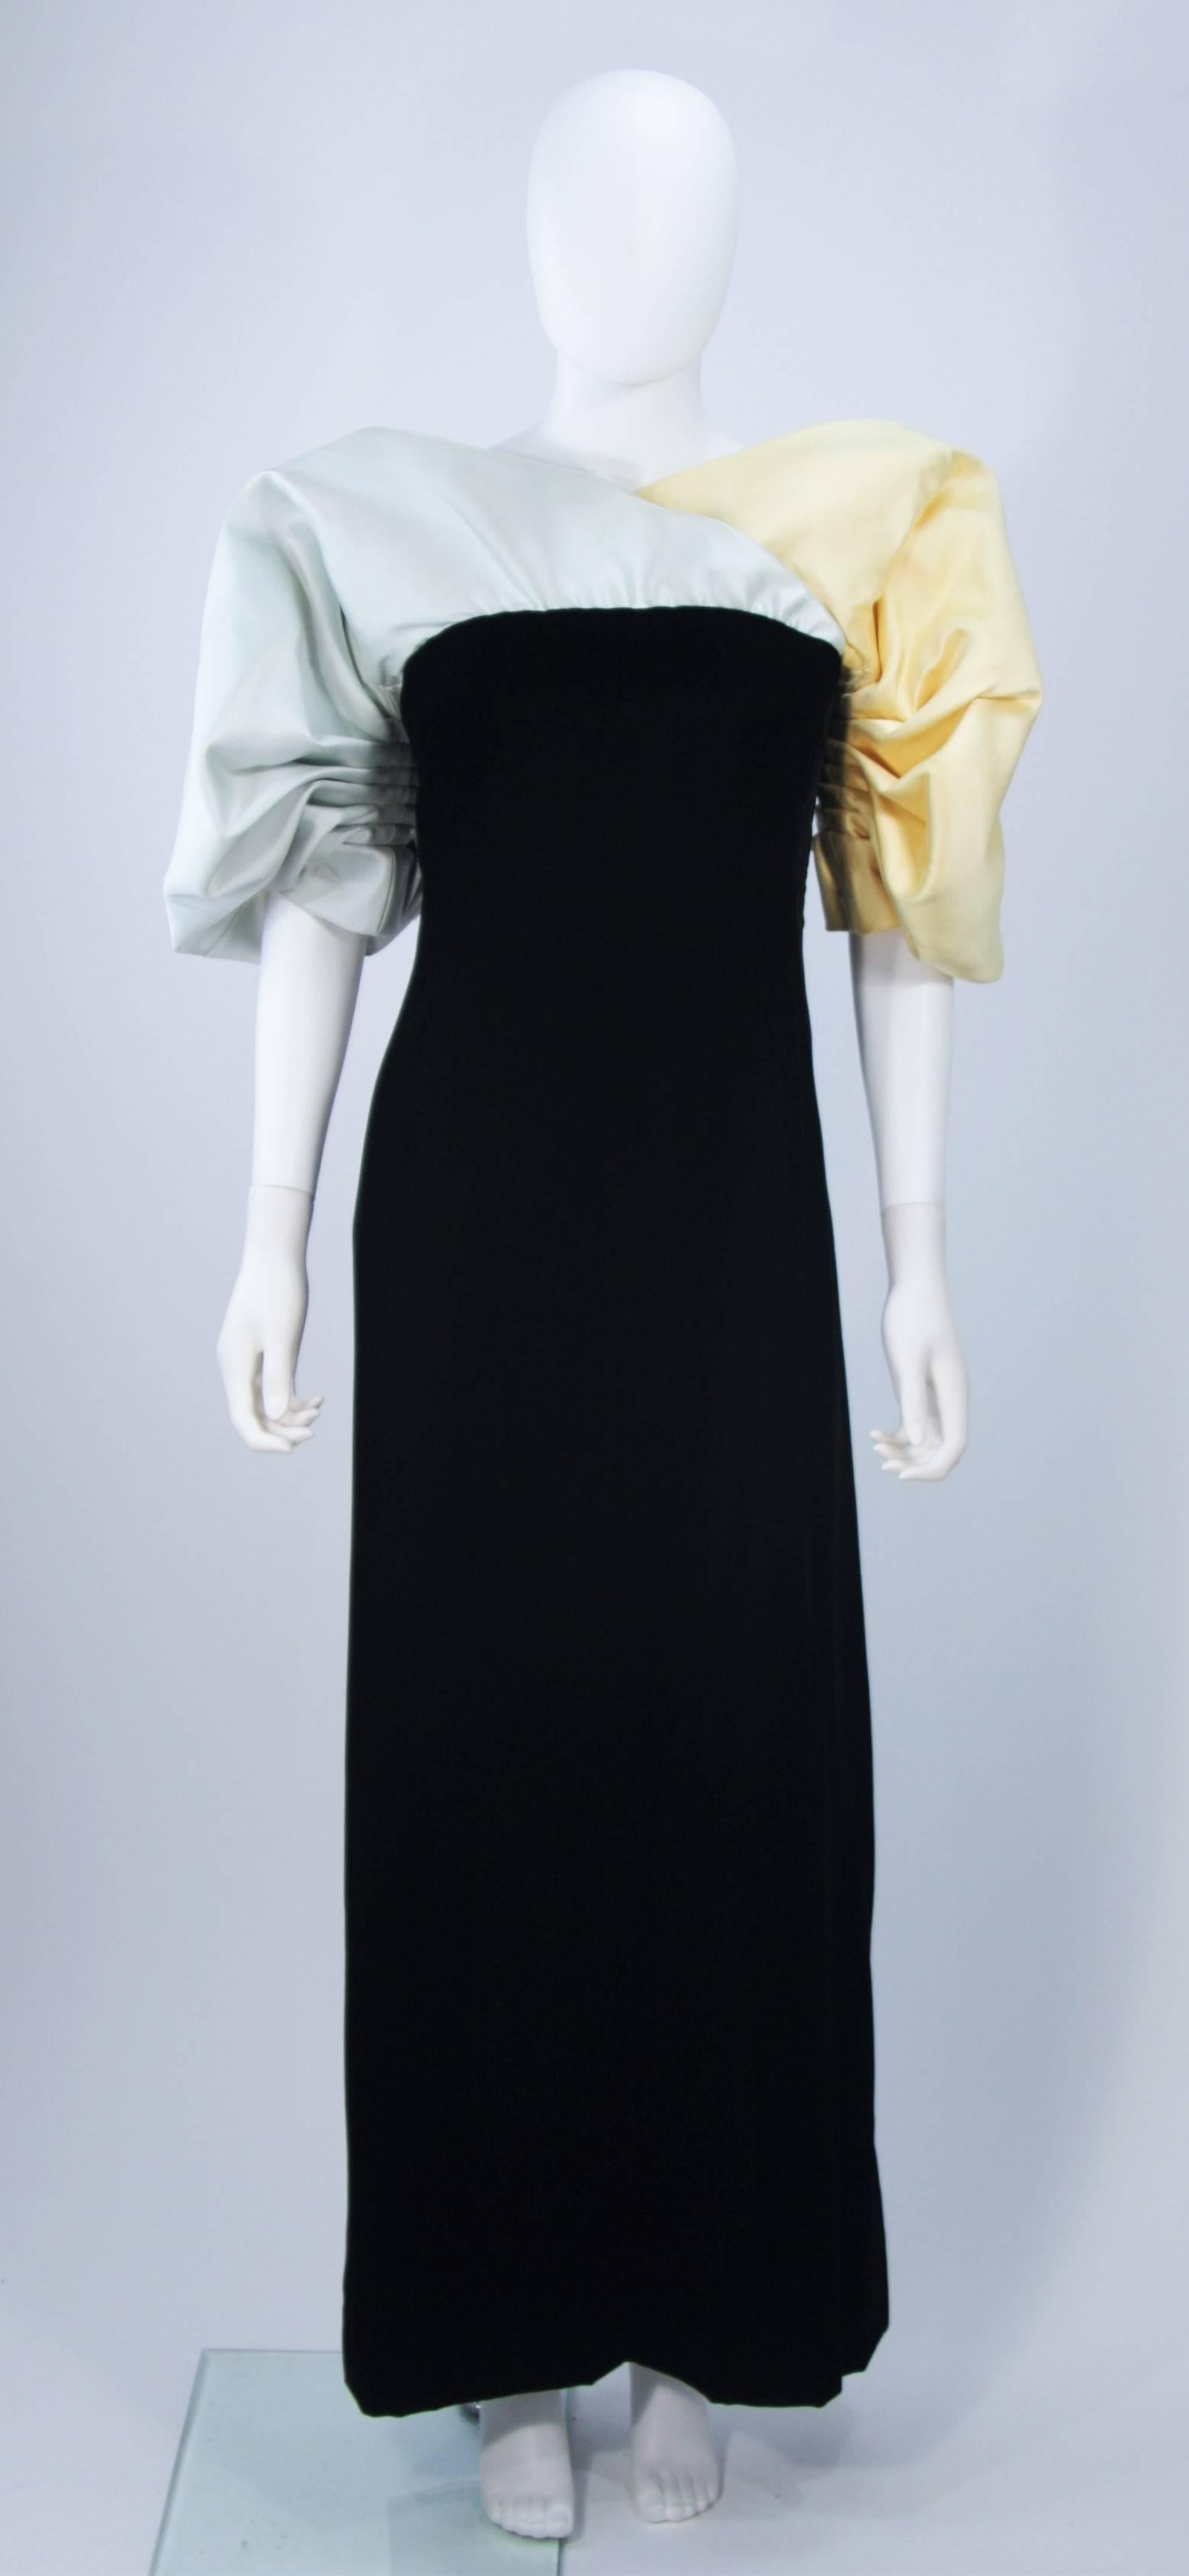  This Jacqueline De Ribes gown is composed of a black velvet with blue and yellow silk sleeves. There is an interior bustier foundation. In excellent vintage condition. 

**Please cross-reference measurements for personal accuracy. Size in